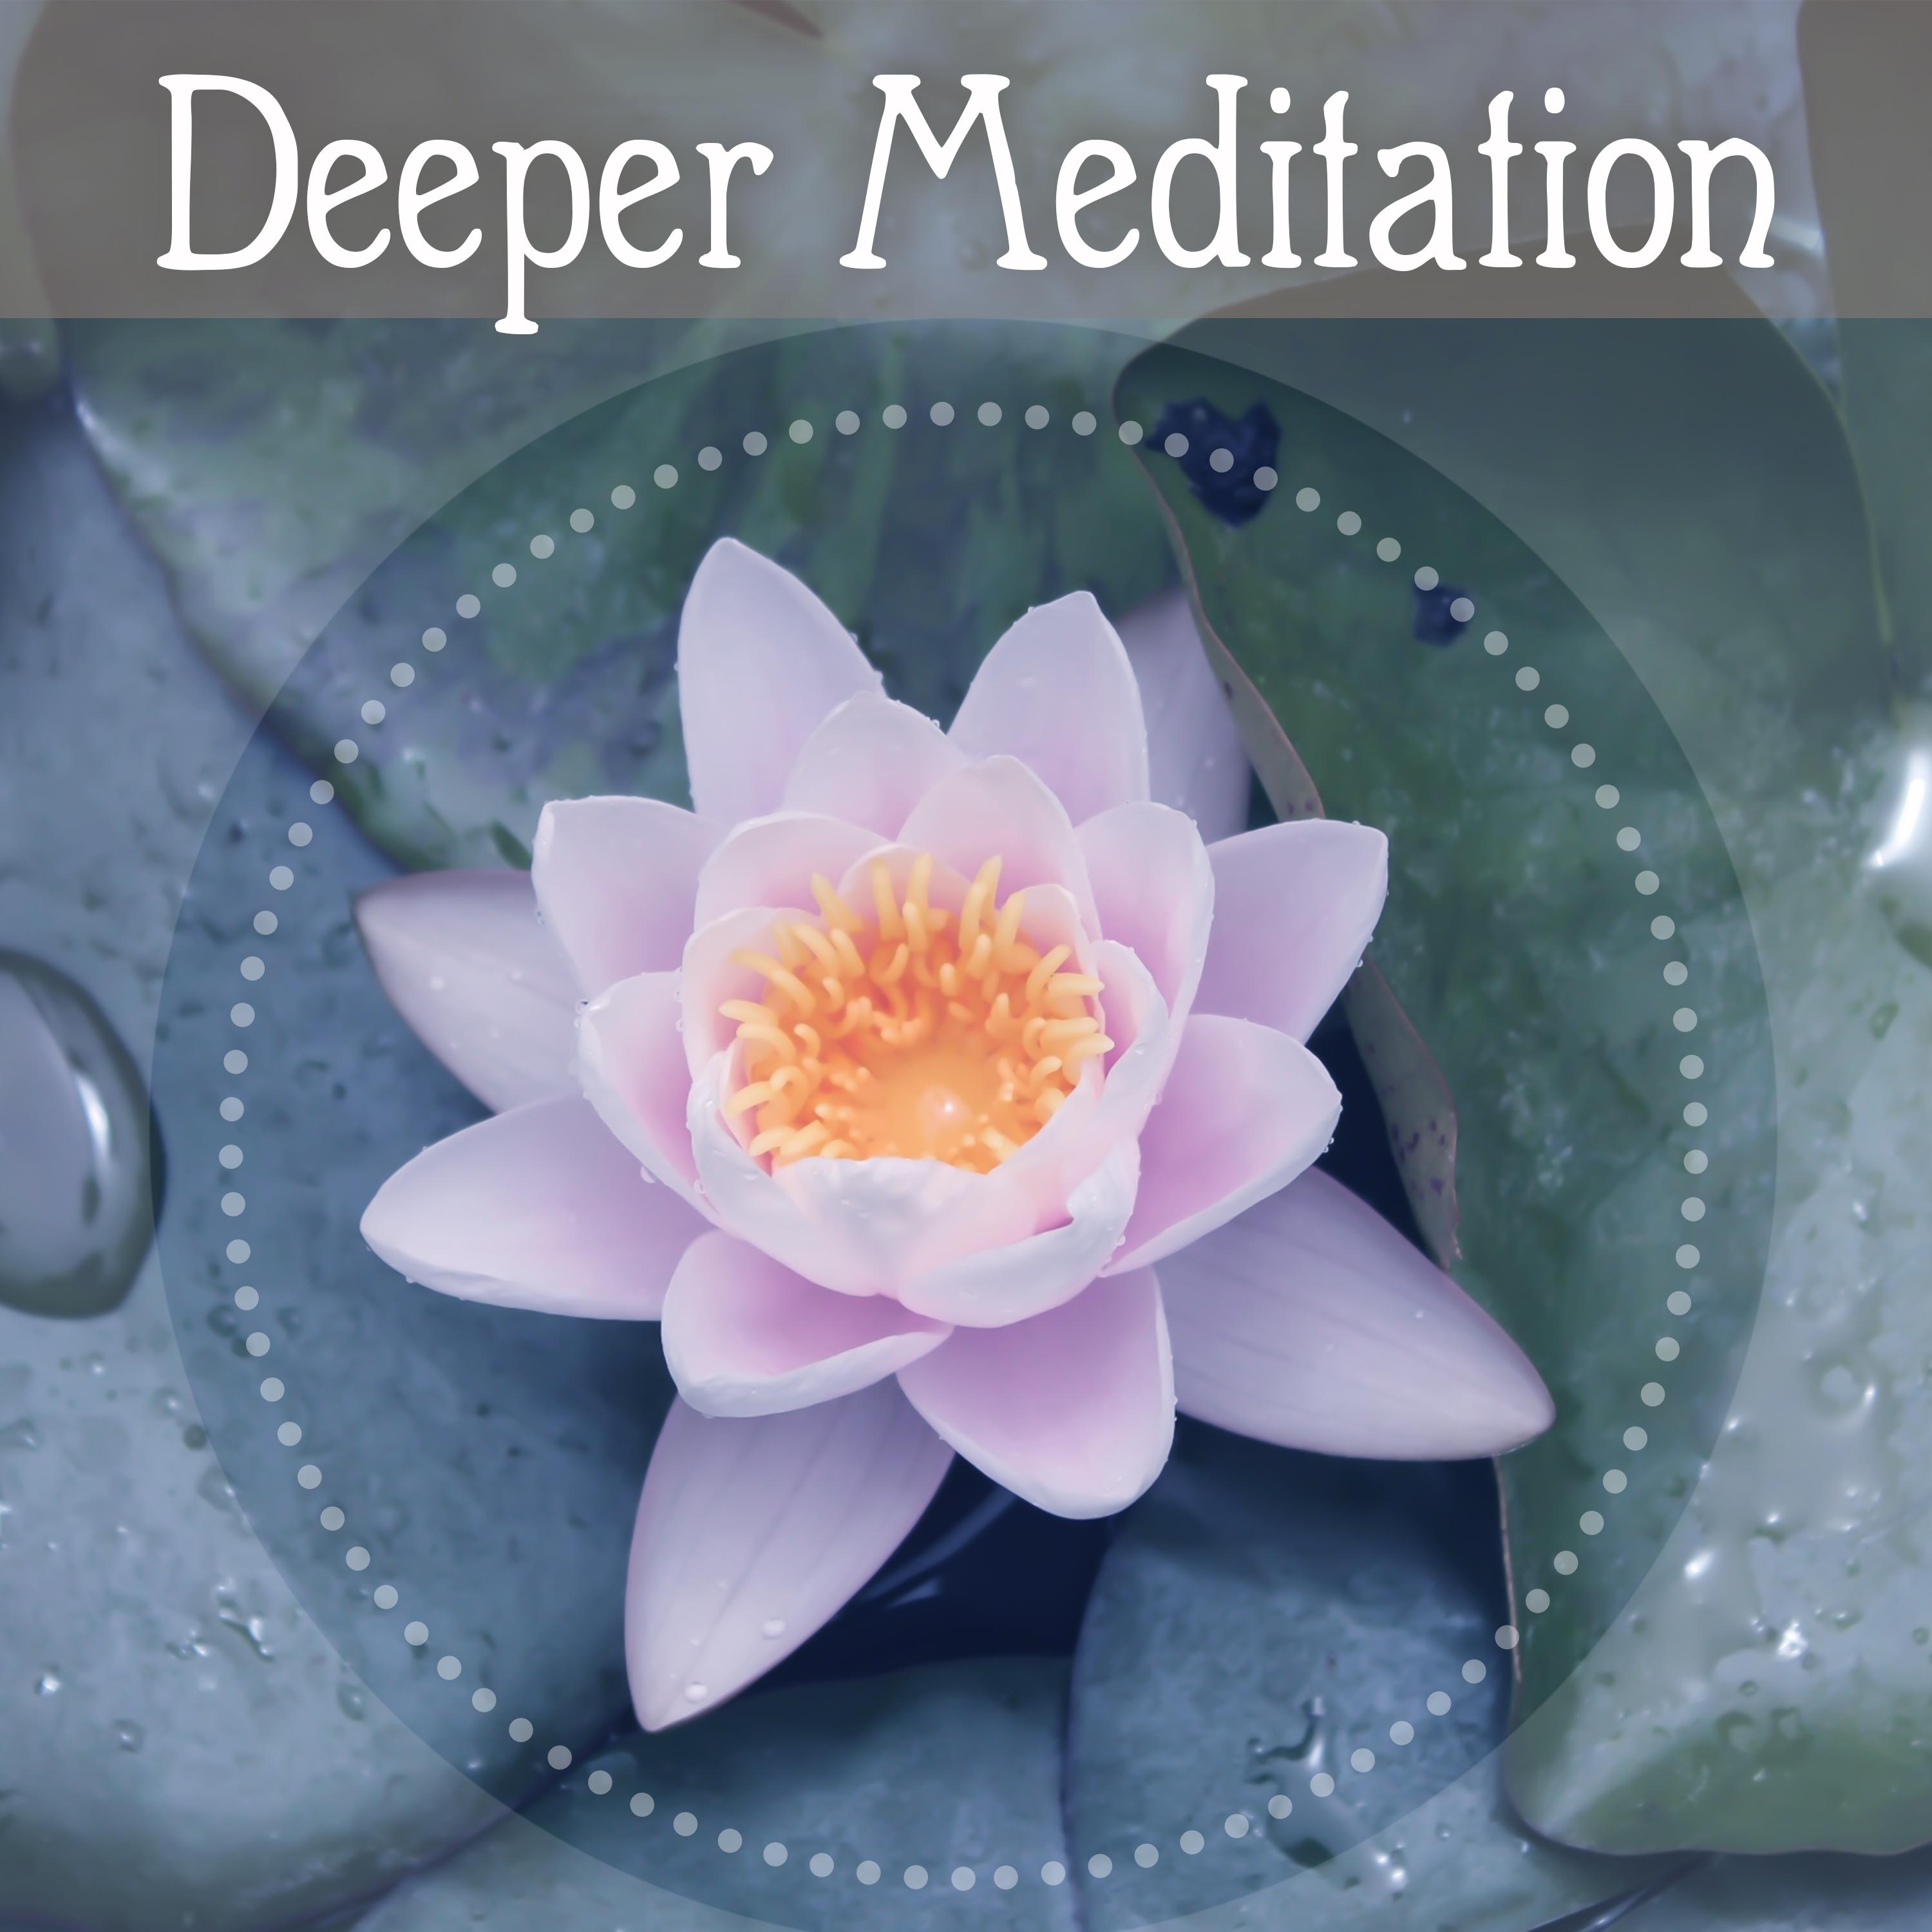 Deeper Meditation – New Age Sounds, Relaxing Music for Deep Meditation, Yoga, Contemplation